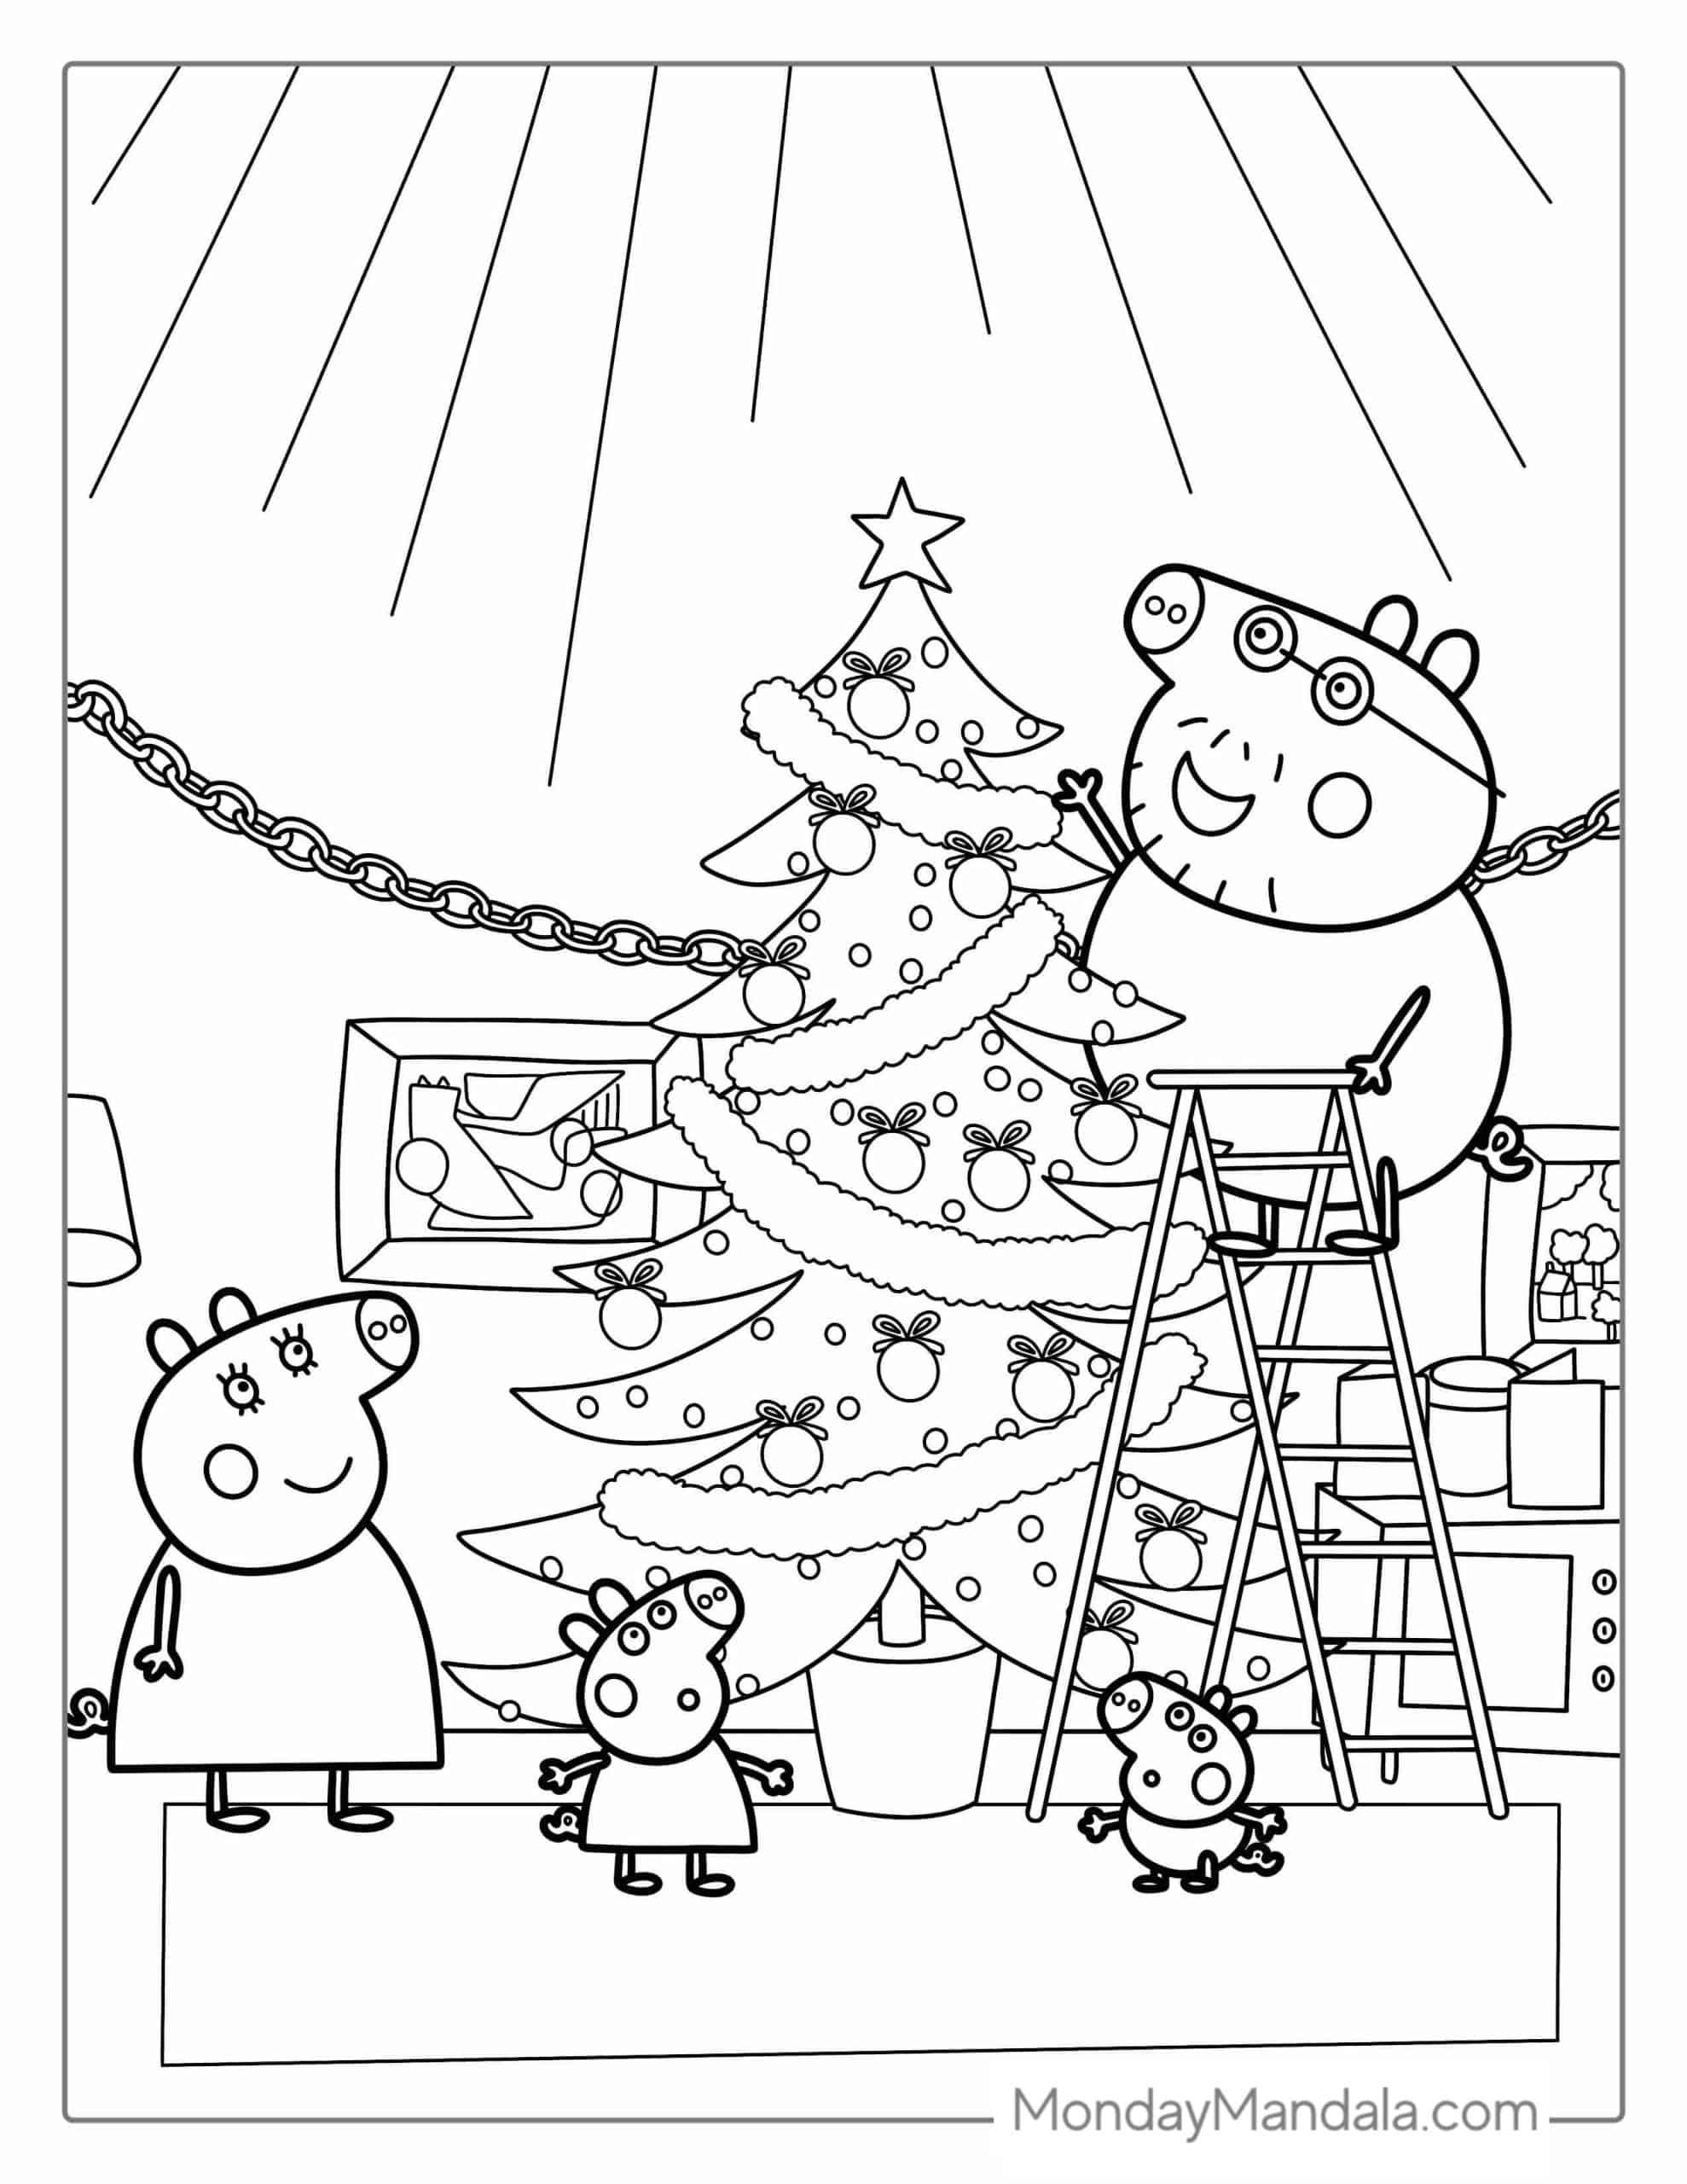 Peppa pig coloring pages free pdf printables peppa pig coloring pages peppa pig colouring printable christmas coloring pages